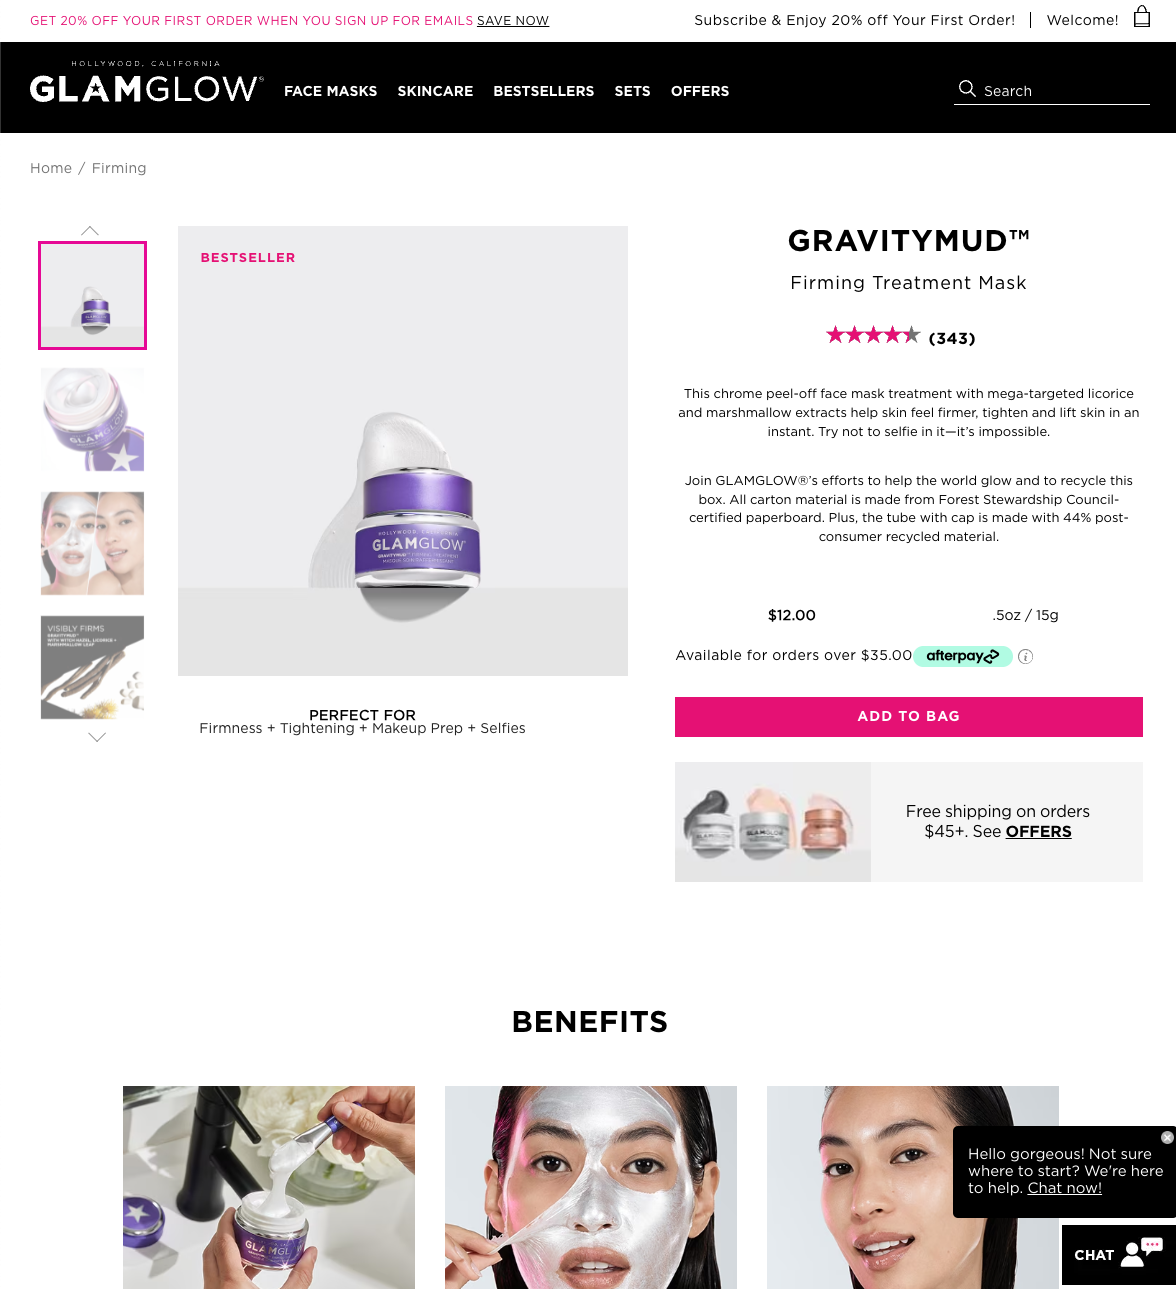 A screenshot of glamglow.com showing a product page for GravityMud. It has a number of pictures of the product, a description, and a button to add to cart.